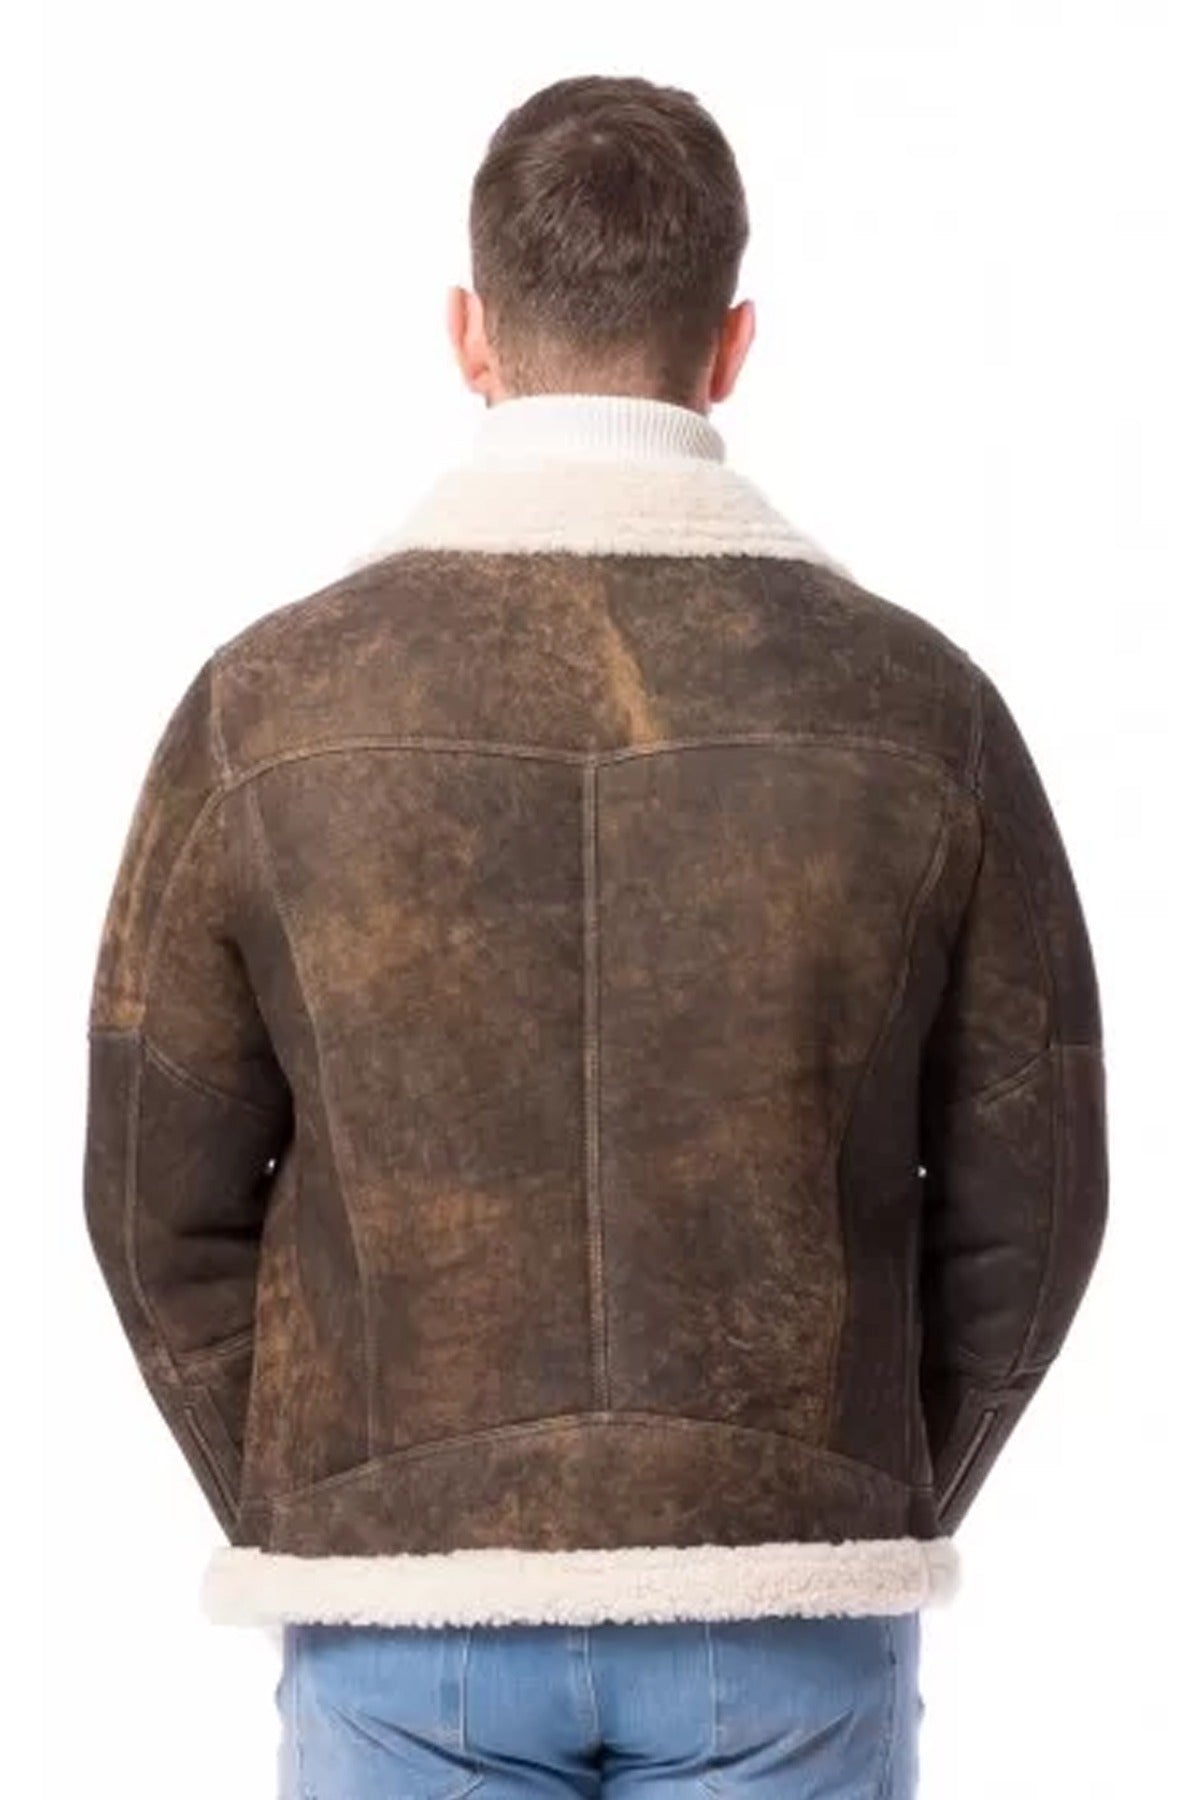 Solomon Stephen's Distressed Brown leather Jacket